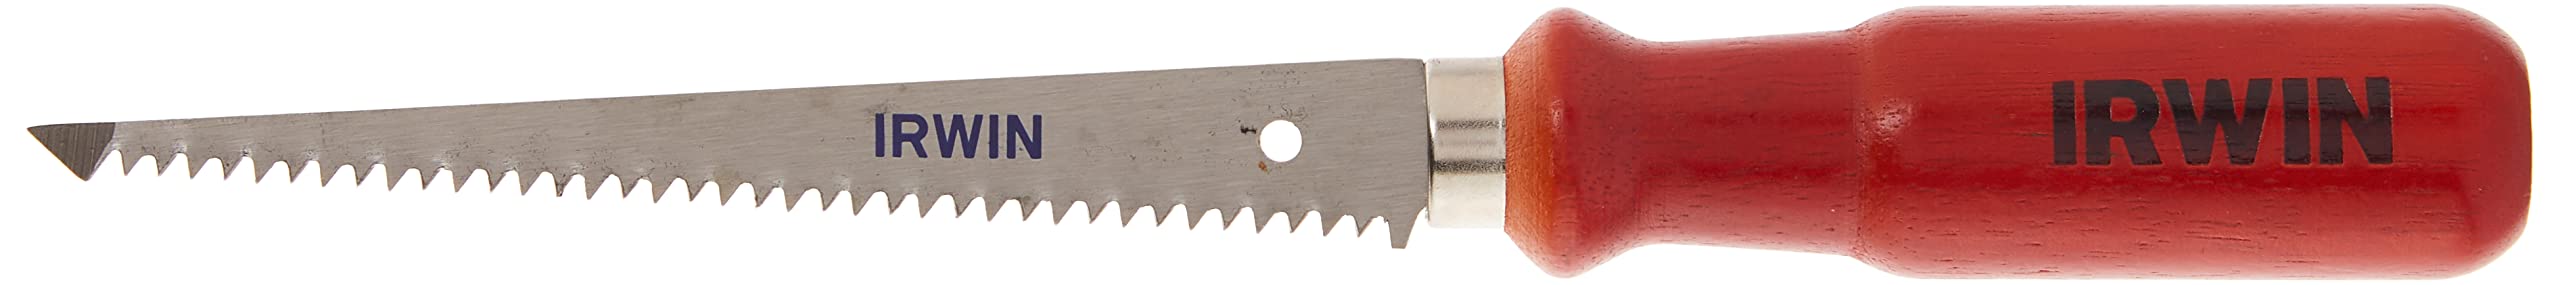 6-1/2" IRWIN Tools Standard Drywall/Jab Saw $3.59 + Free Shipping w/ Prime or on $35+